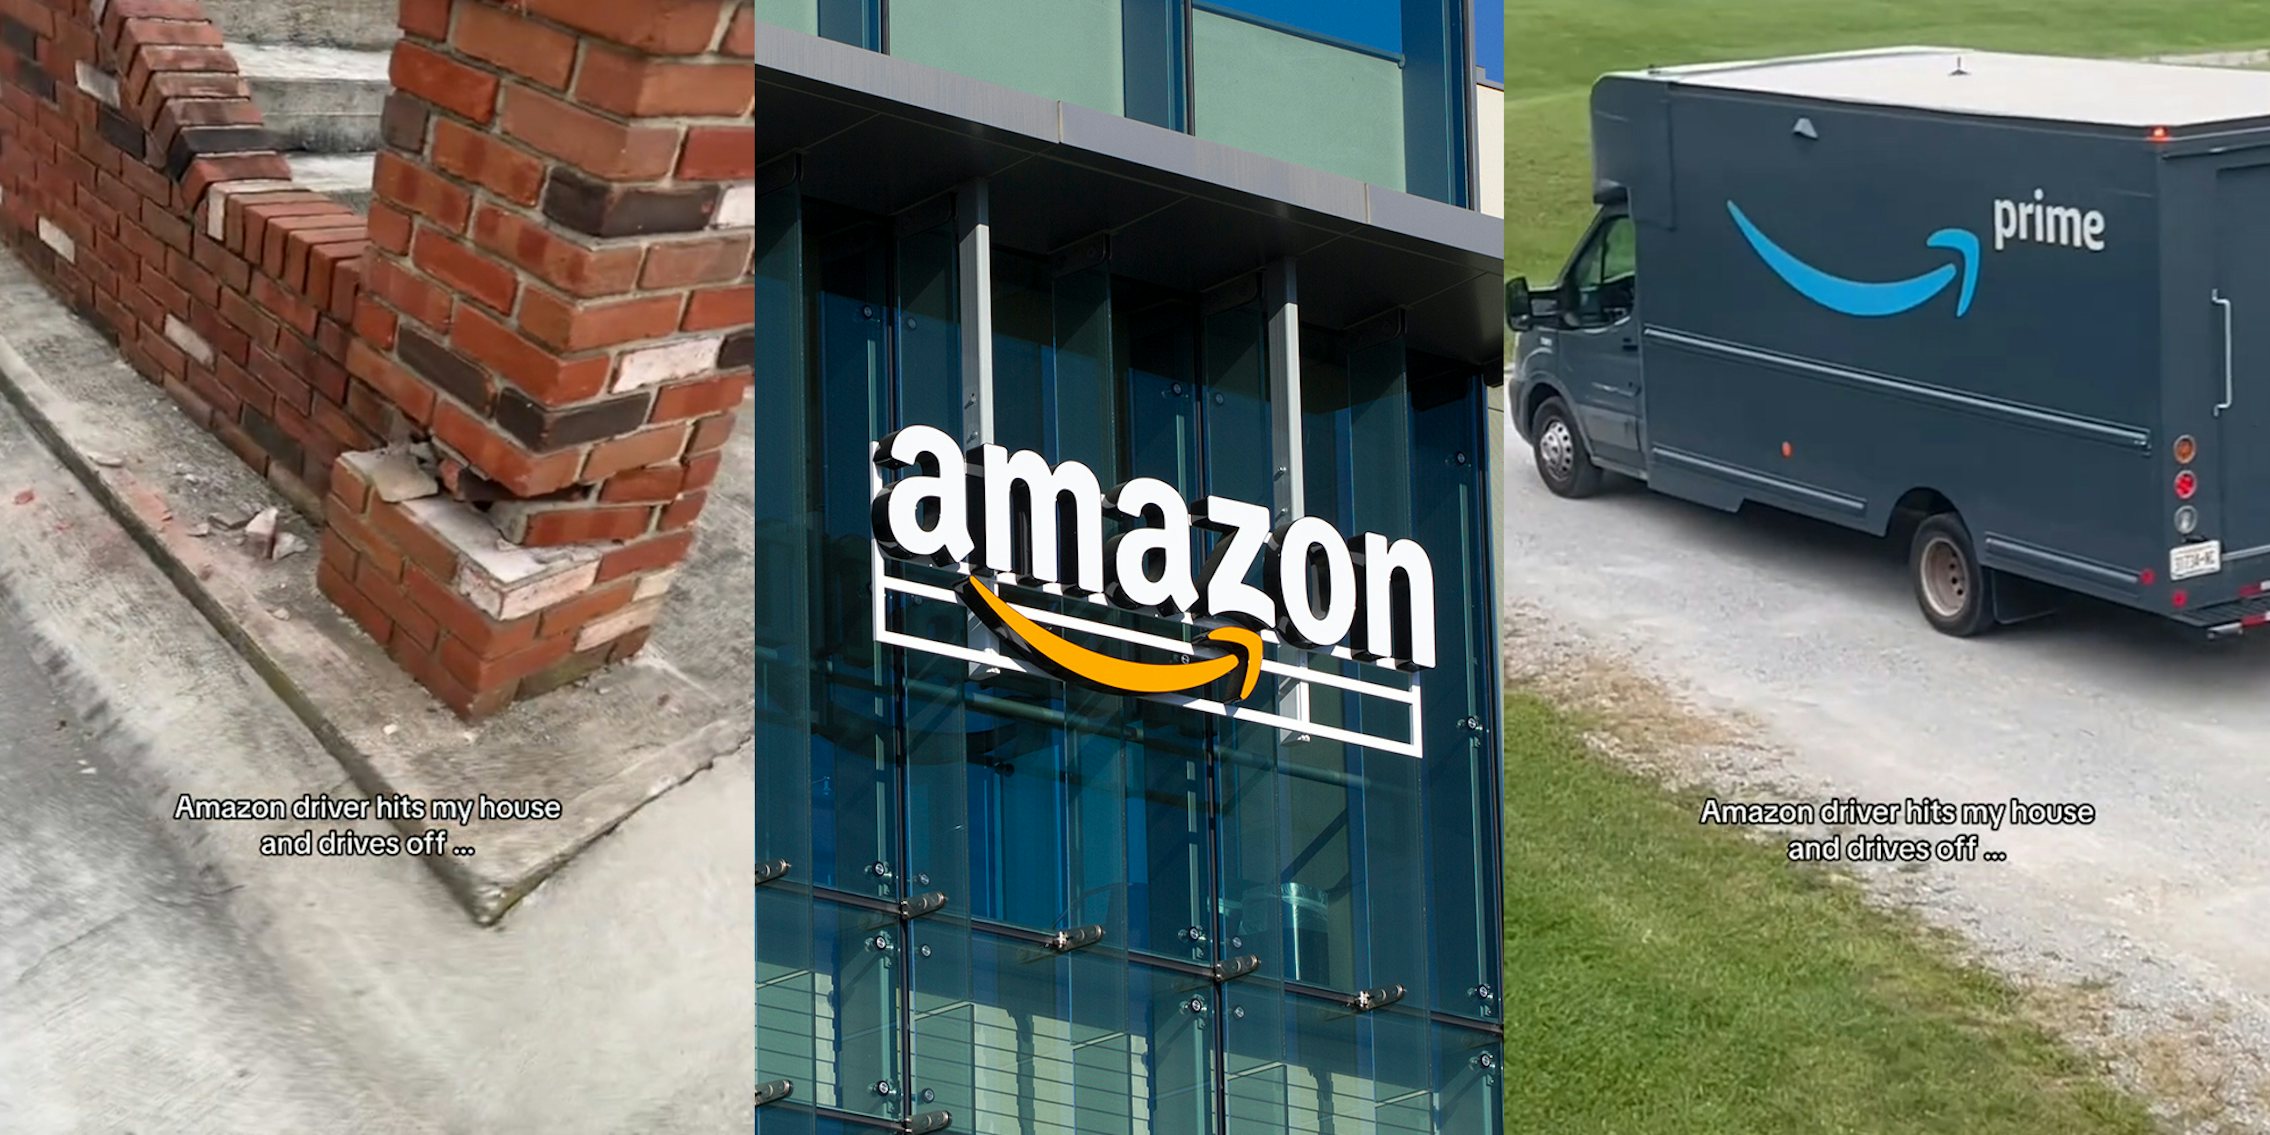 Woman says Amazon driver hit her house, drove away